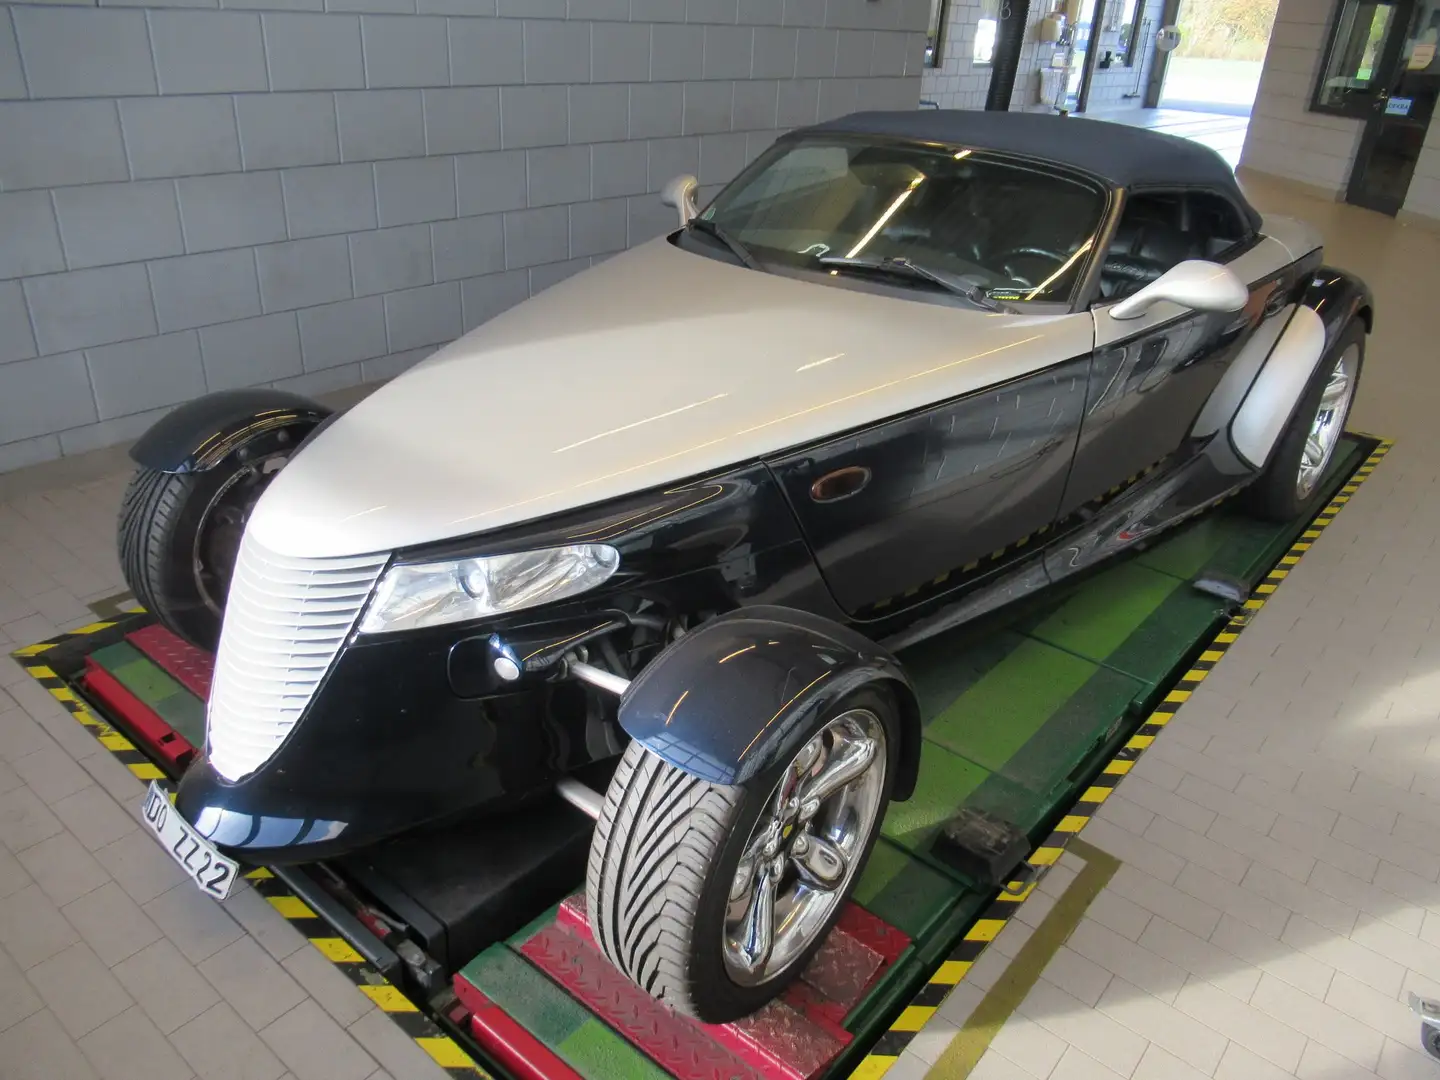 Plymouth Prowler # # # Cool Car for Crazy People # # # plava - 2